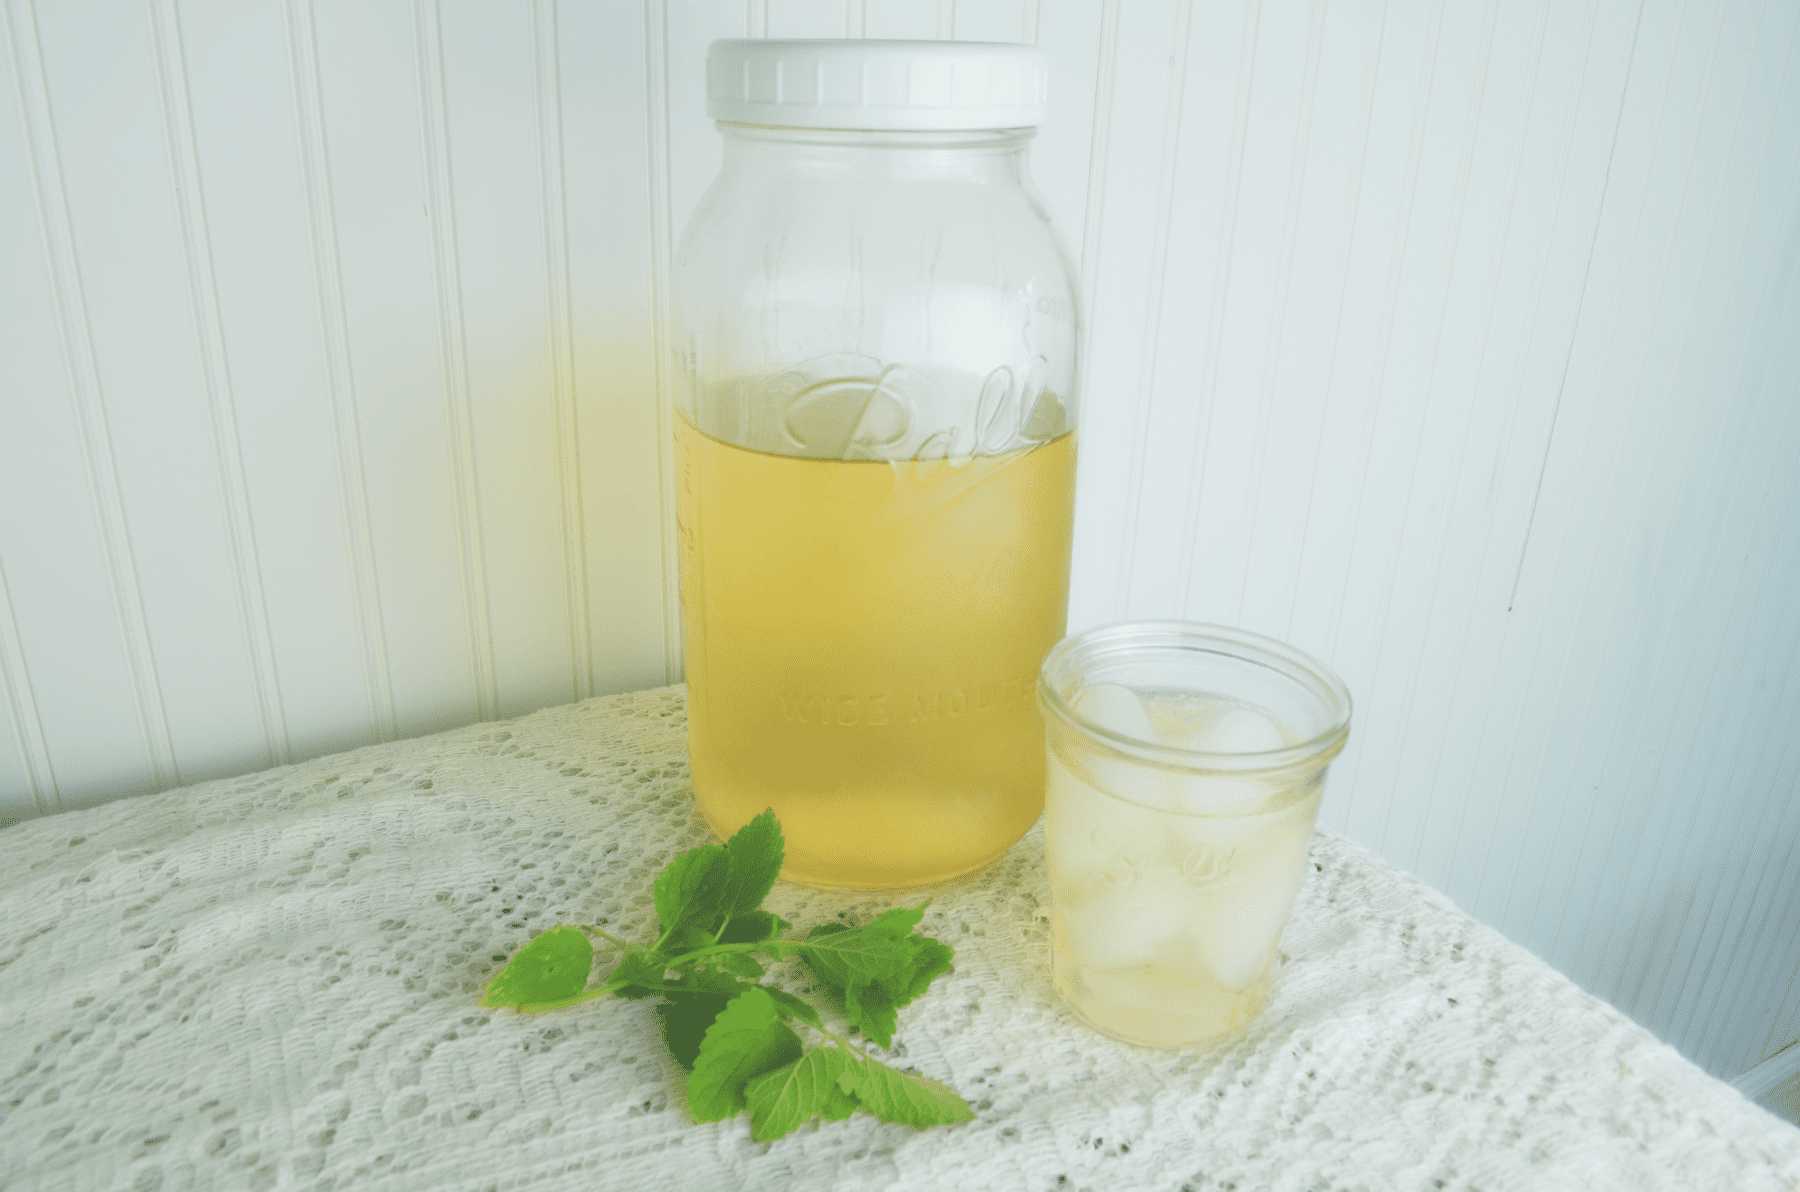 A large Ball canning jar filled with fresh iced tea sits on a lace tablecloth next to a cup of iced tea and green lemon balm leaves